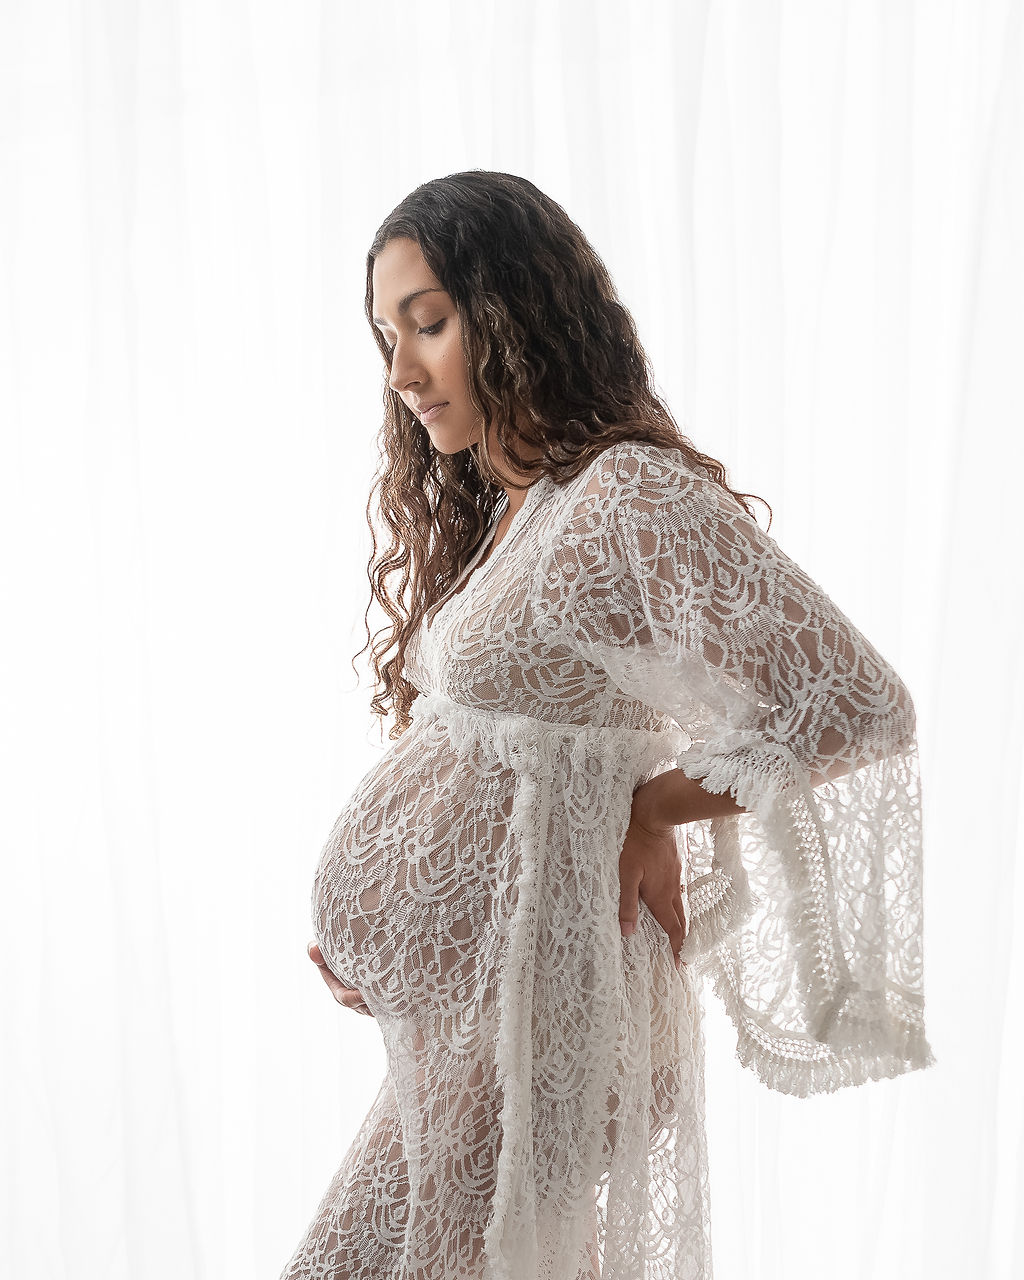 mom to be in lace white maternity gown holding her bump and looking down Ashland Yoga Center